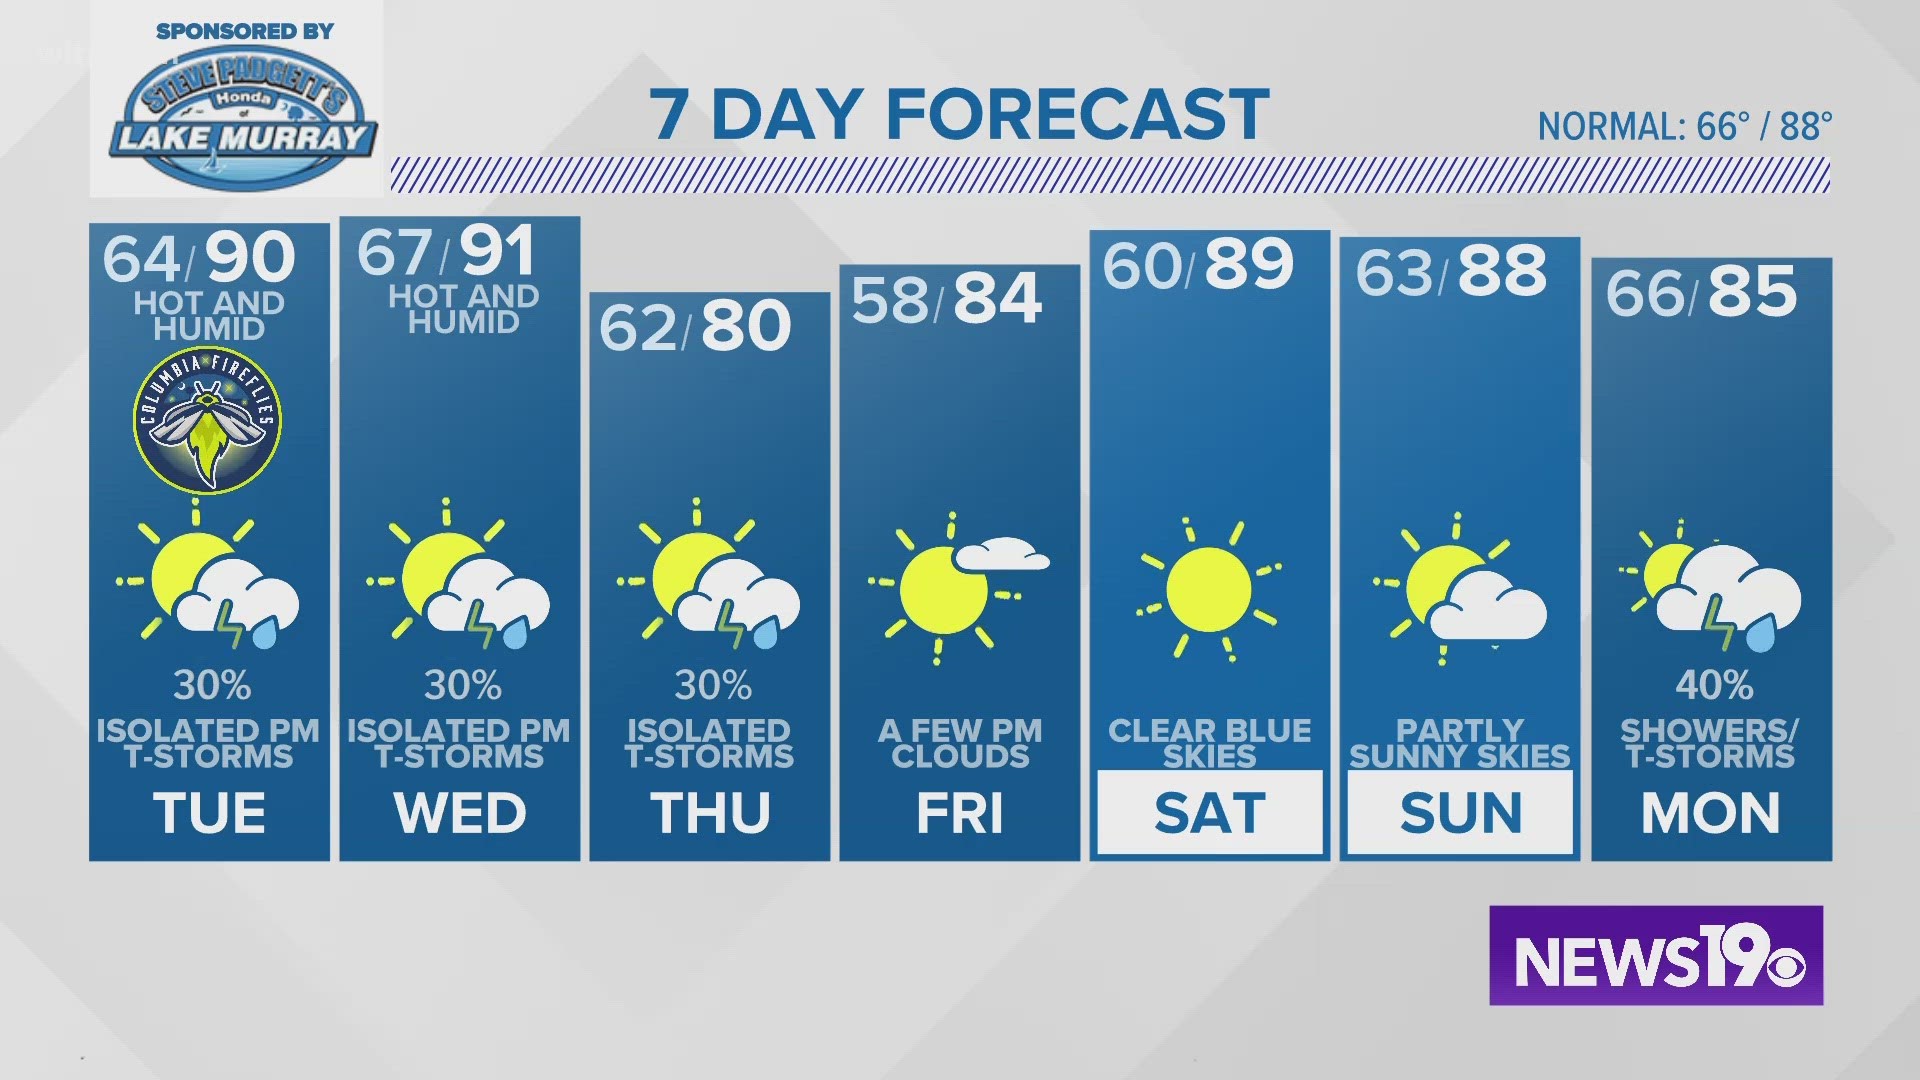 Very slight chance for thunderstorms in The Midlands tonight and tomorrow. It's going to be hot and humid tomorrow with high temperatures in the low 90°s.